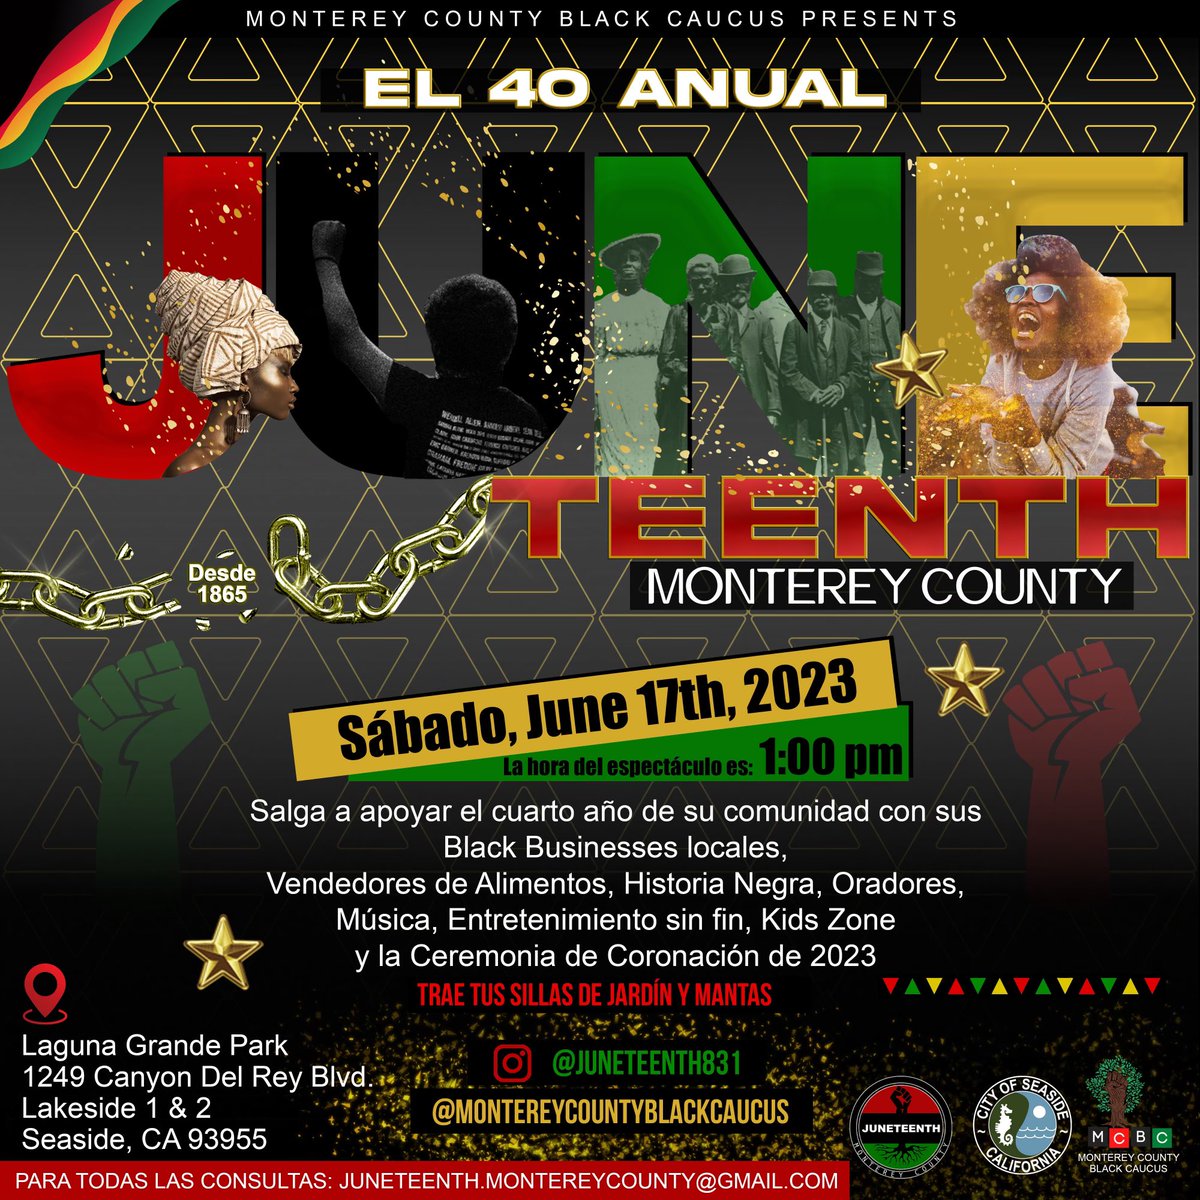 JUNETEENTH #FreedomDay Festival.
A summer celebration of culture.
Saturday, June 17th, 2023.

#Seaside 
#MontereyCounty 
#Pullup ❤️‍🔥✊🏾